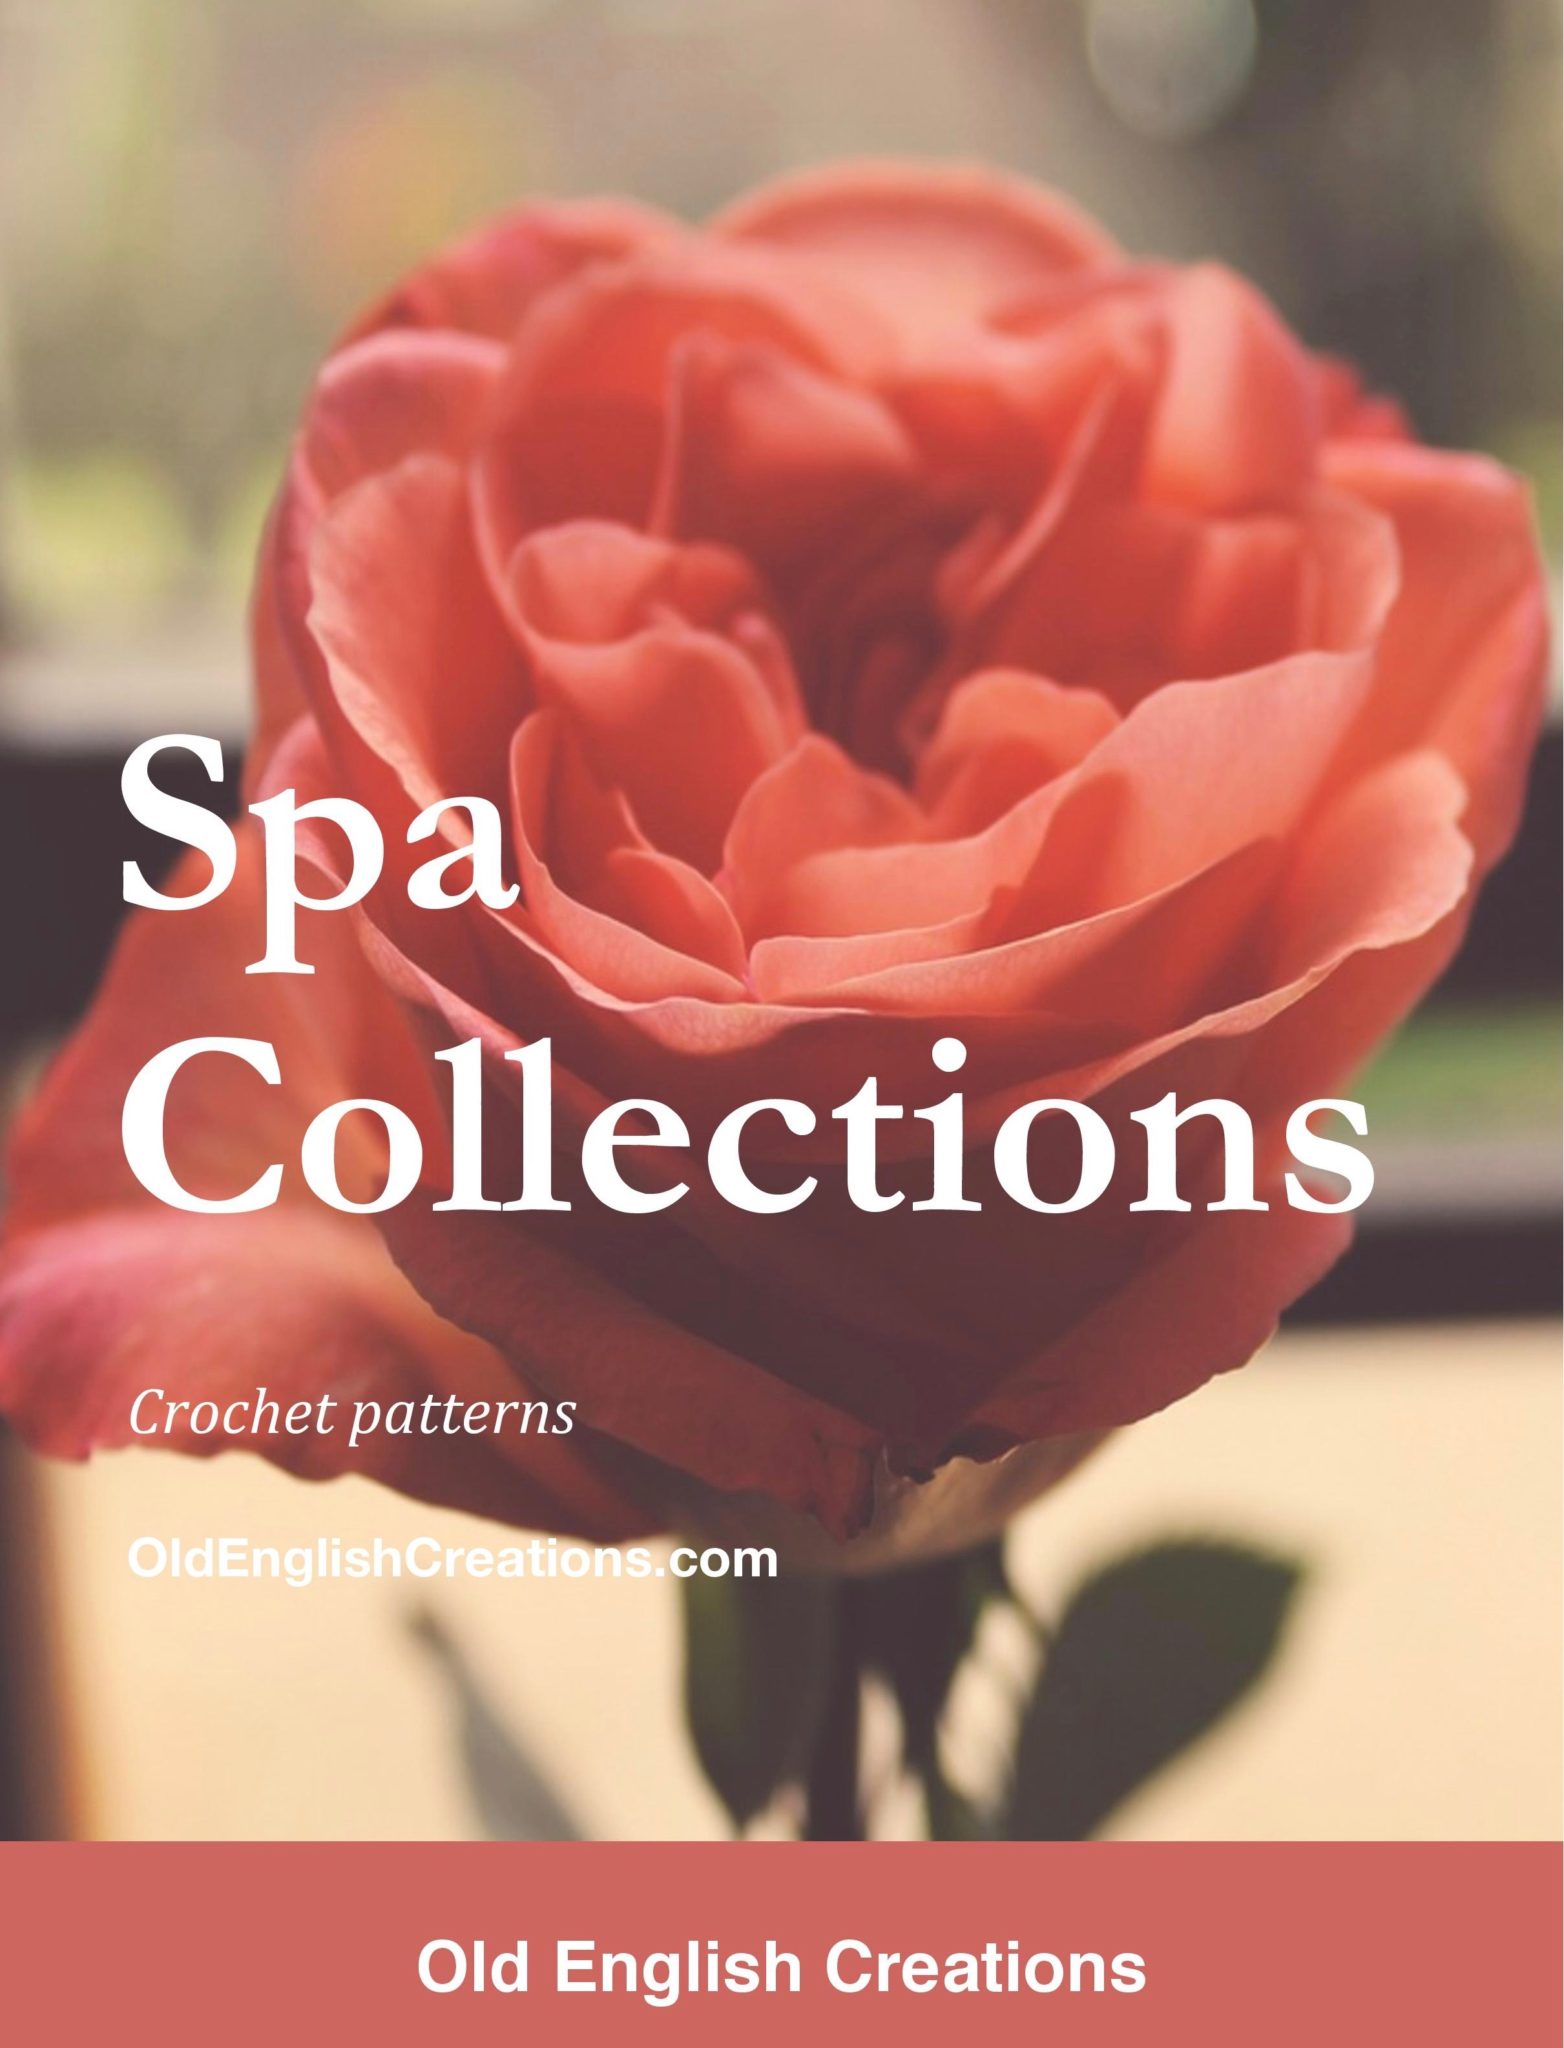 Spa Collections – Crochet Patterns